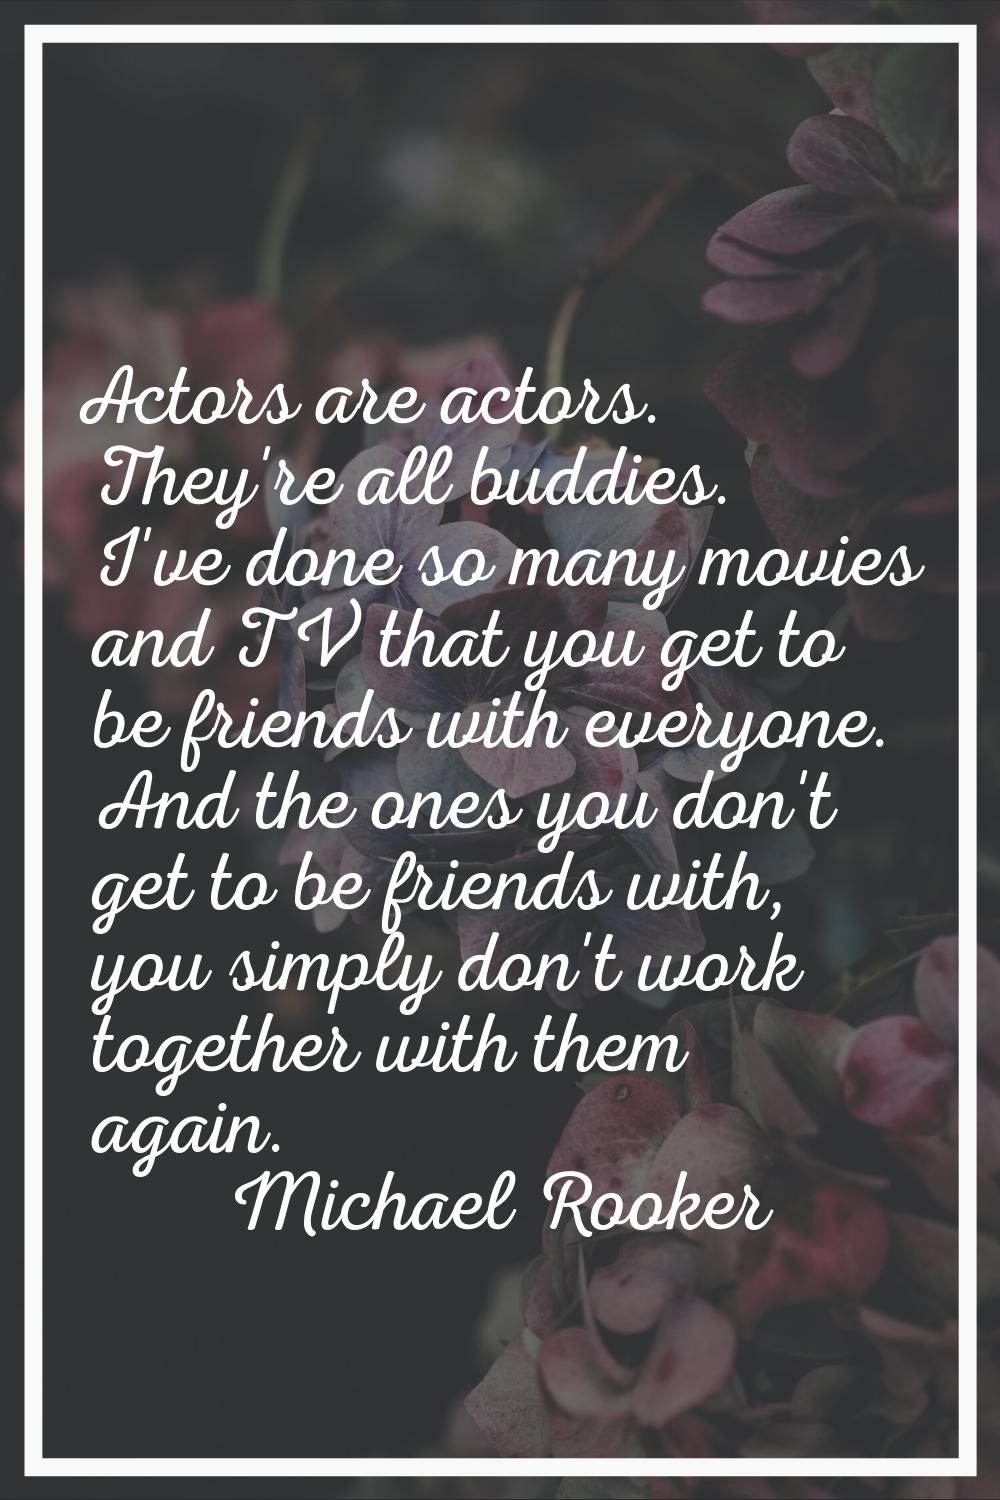 Actors are actors. They're all buddies. I've done so many movies and TV that you get to be friends 